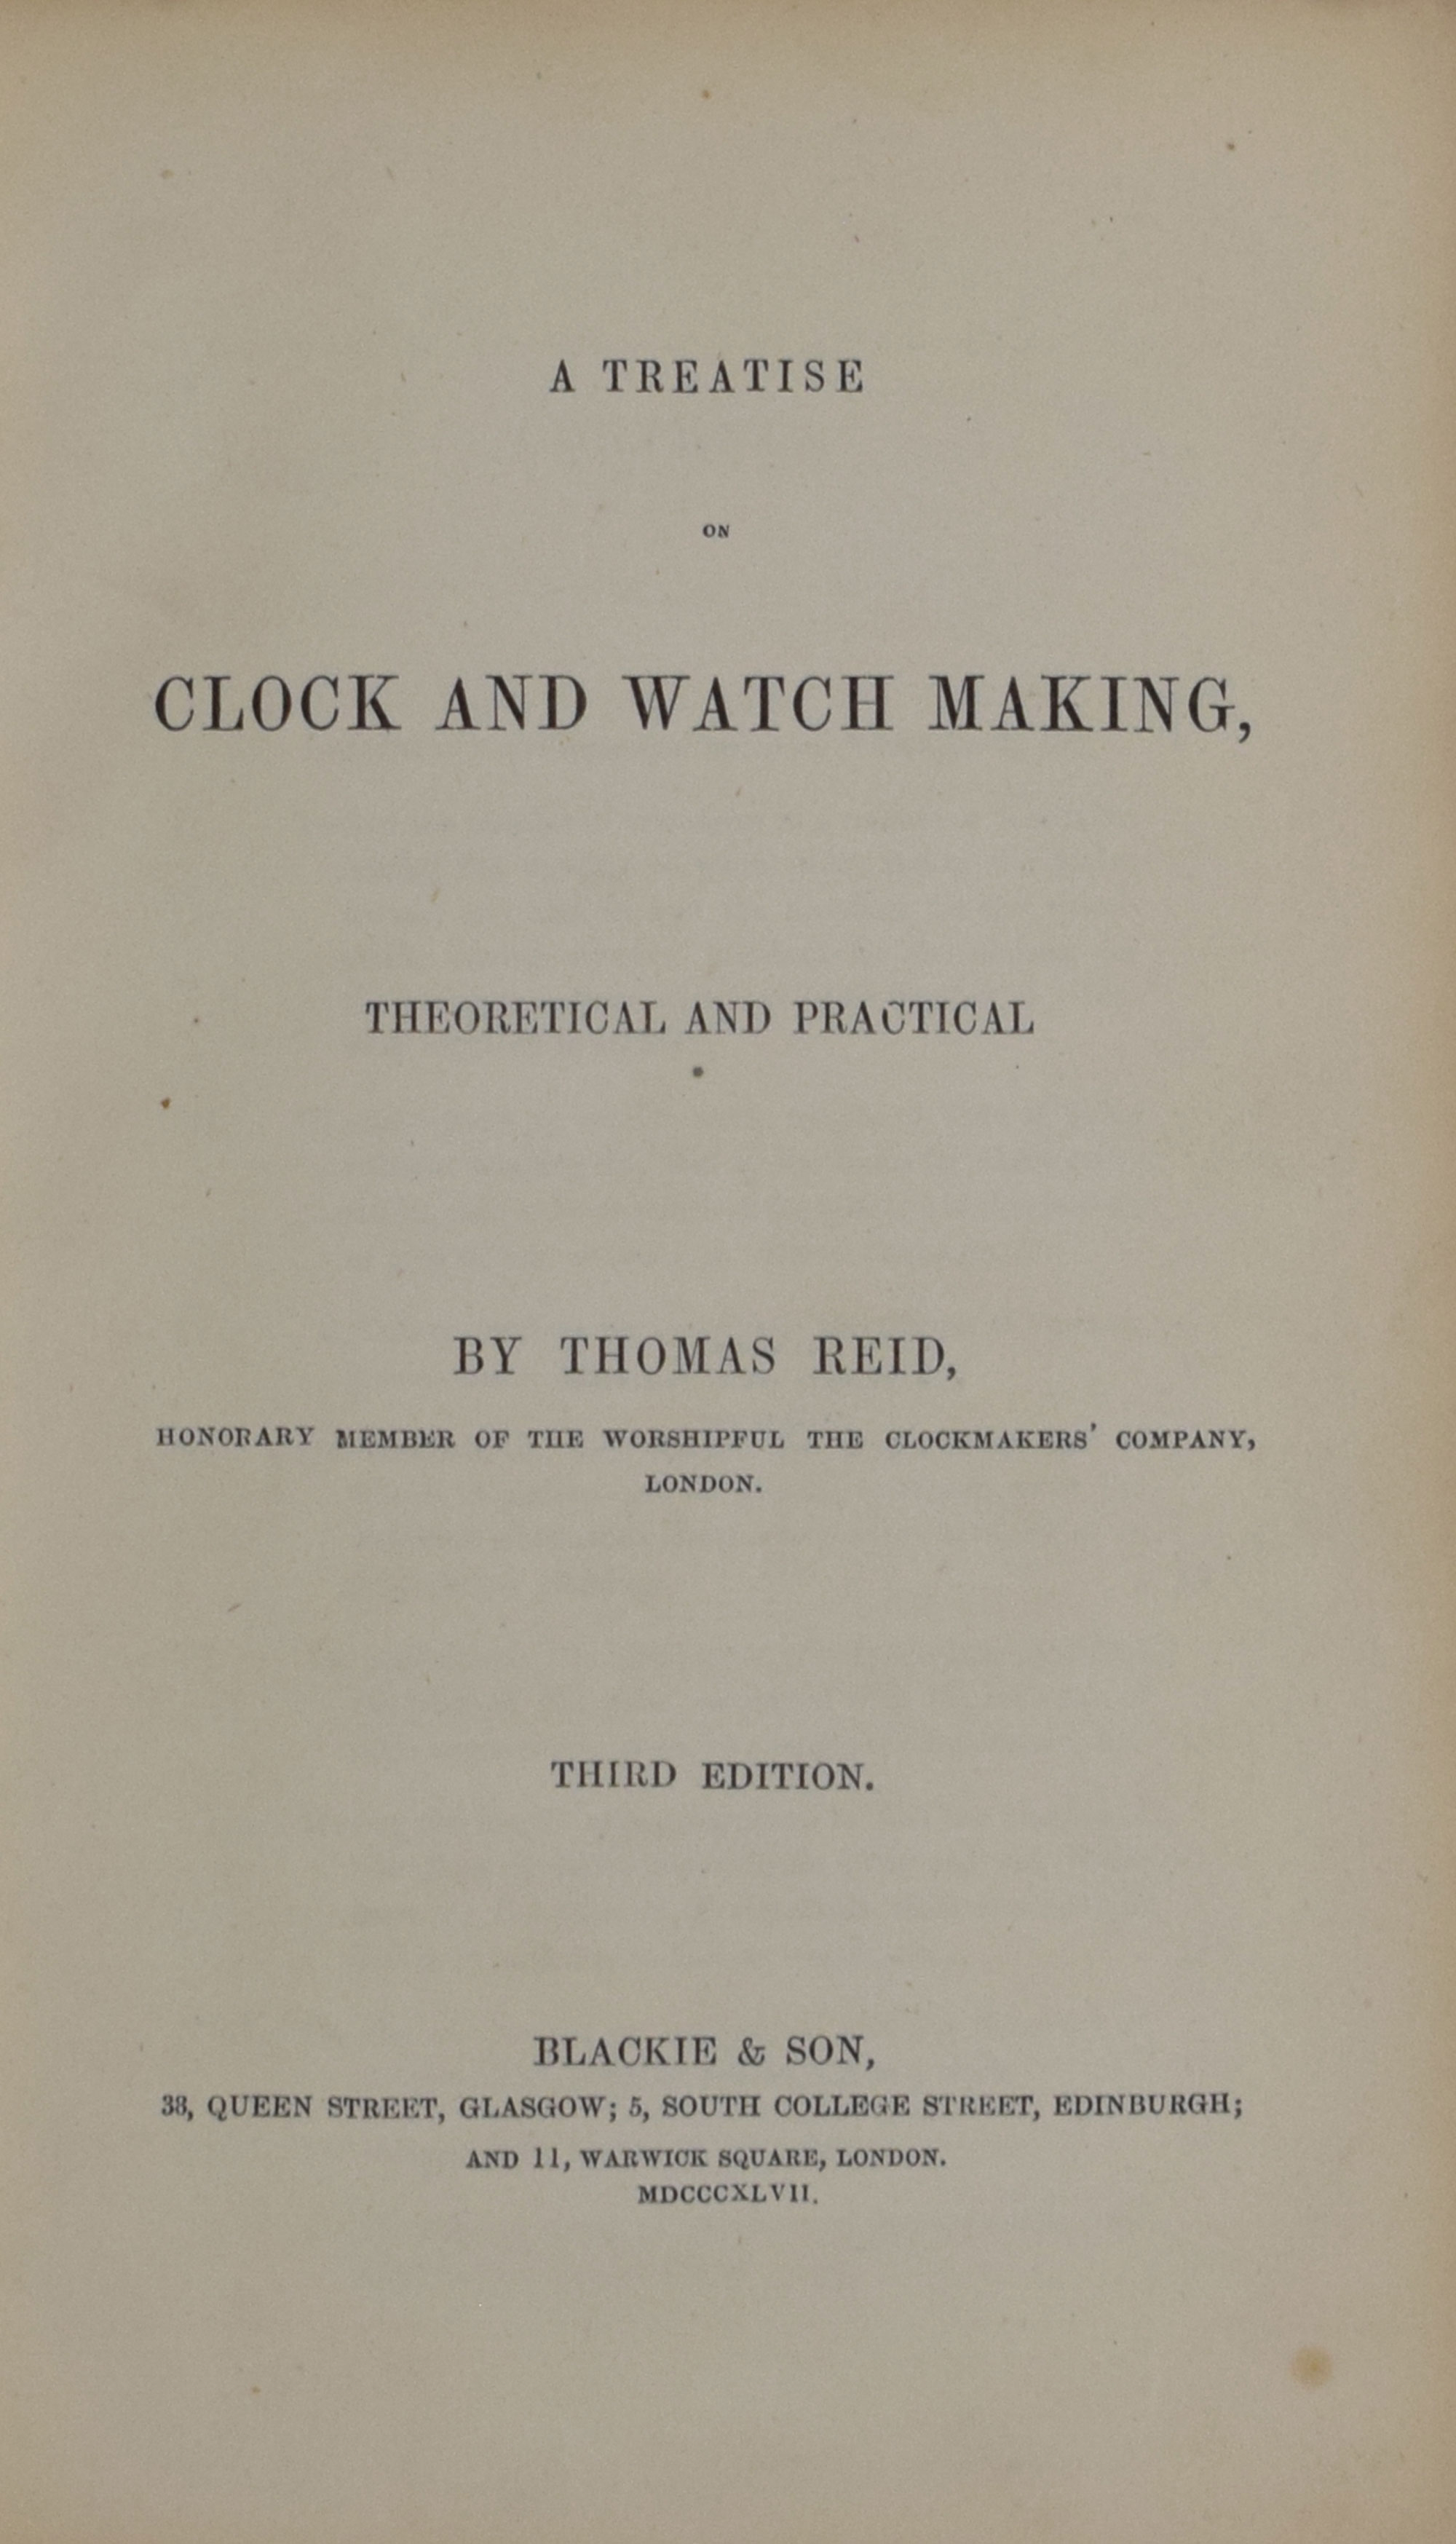 A Treatise on Clock and Watch Making, Theoretical and Practical